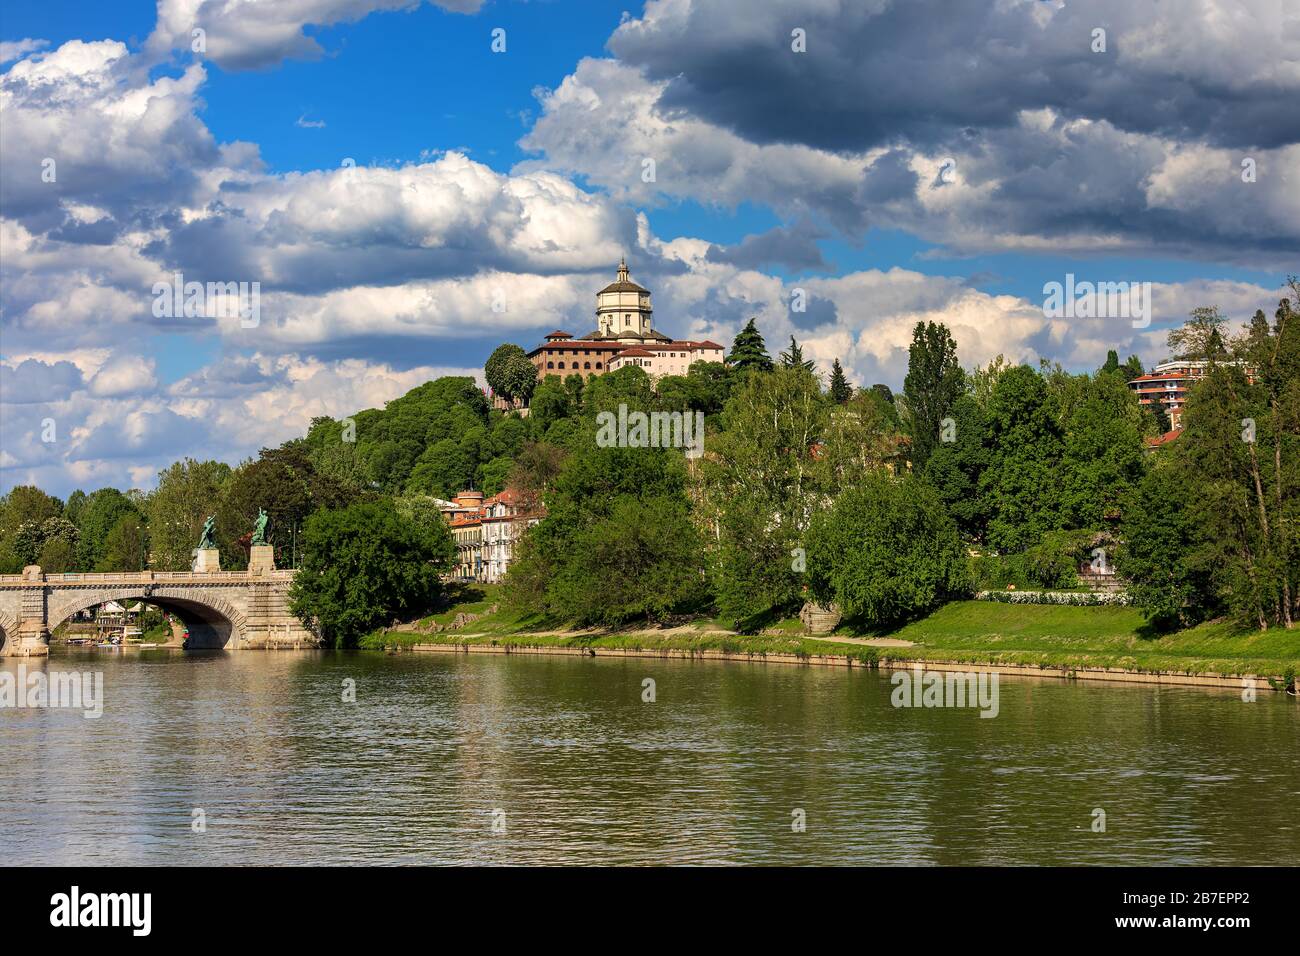 View of urban park with green trees along Po river under beautiful sky in Turin, Italy. Stock Photo